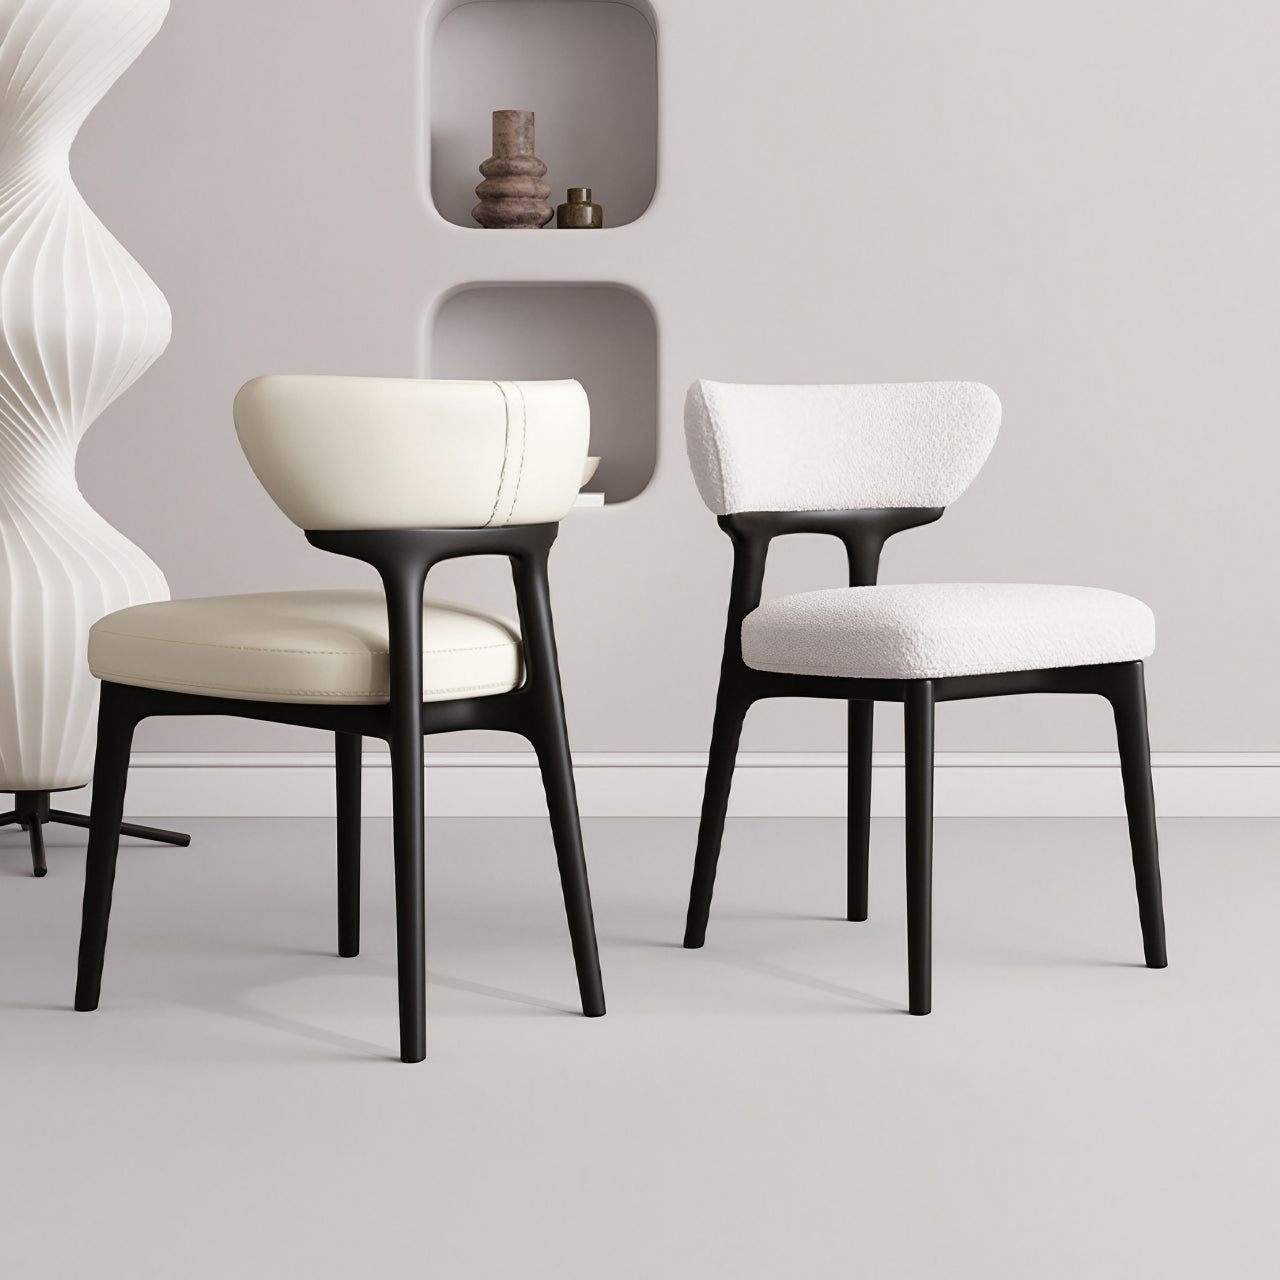 Luxurious single-seat dining chair with ergonomic design in white